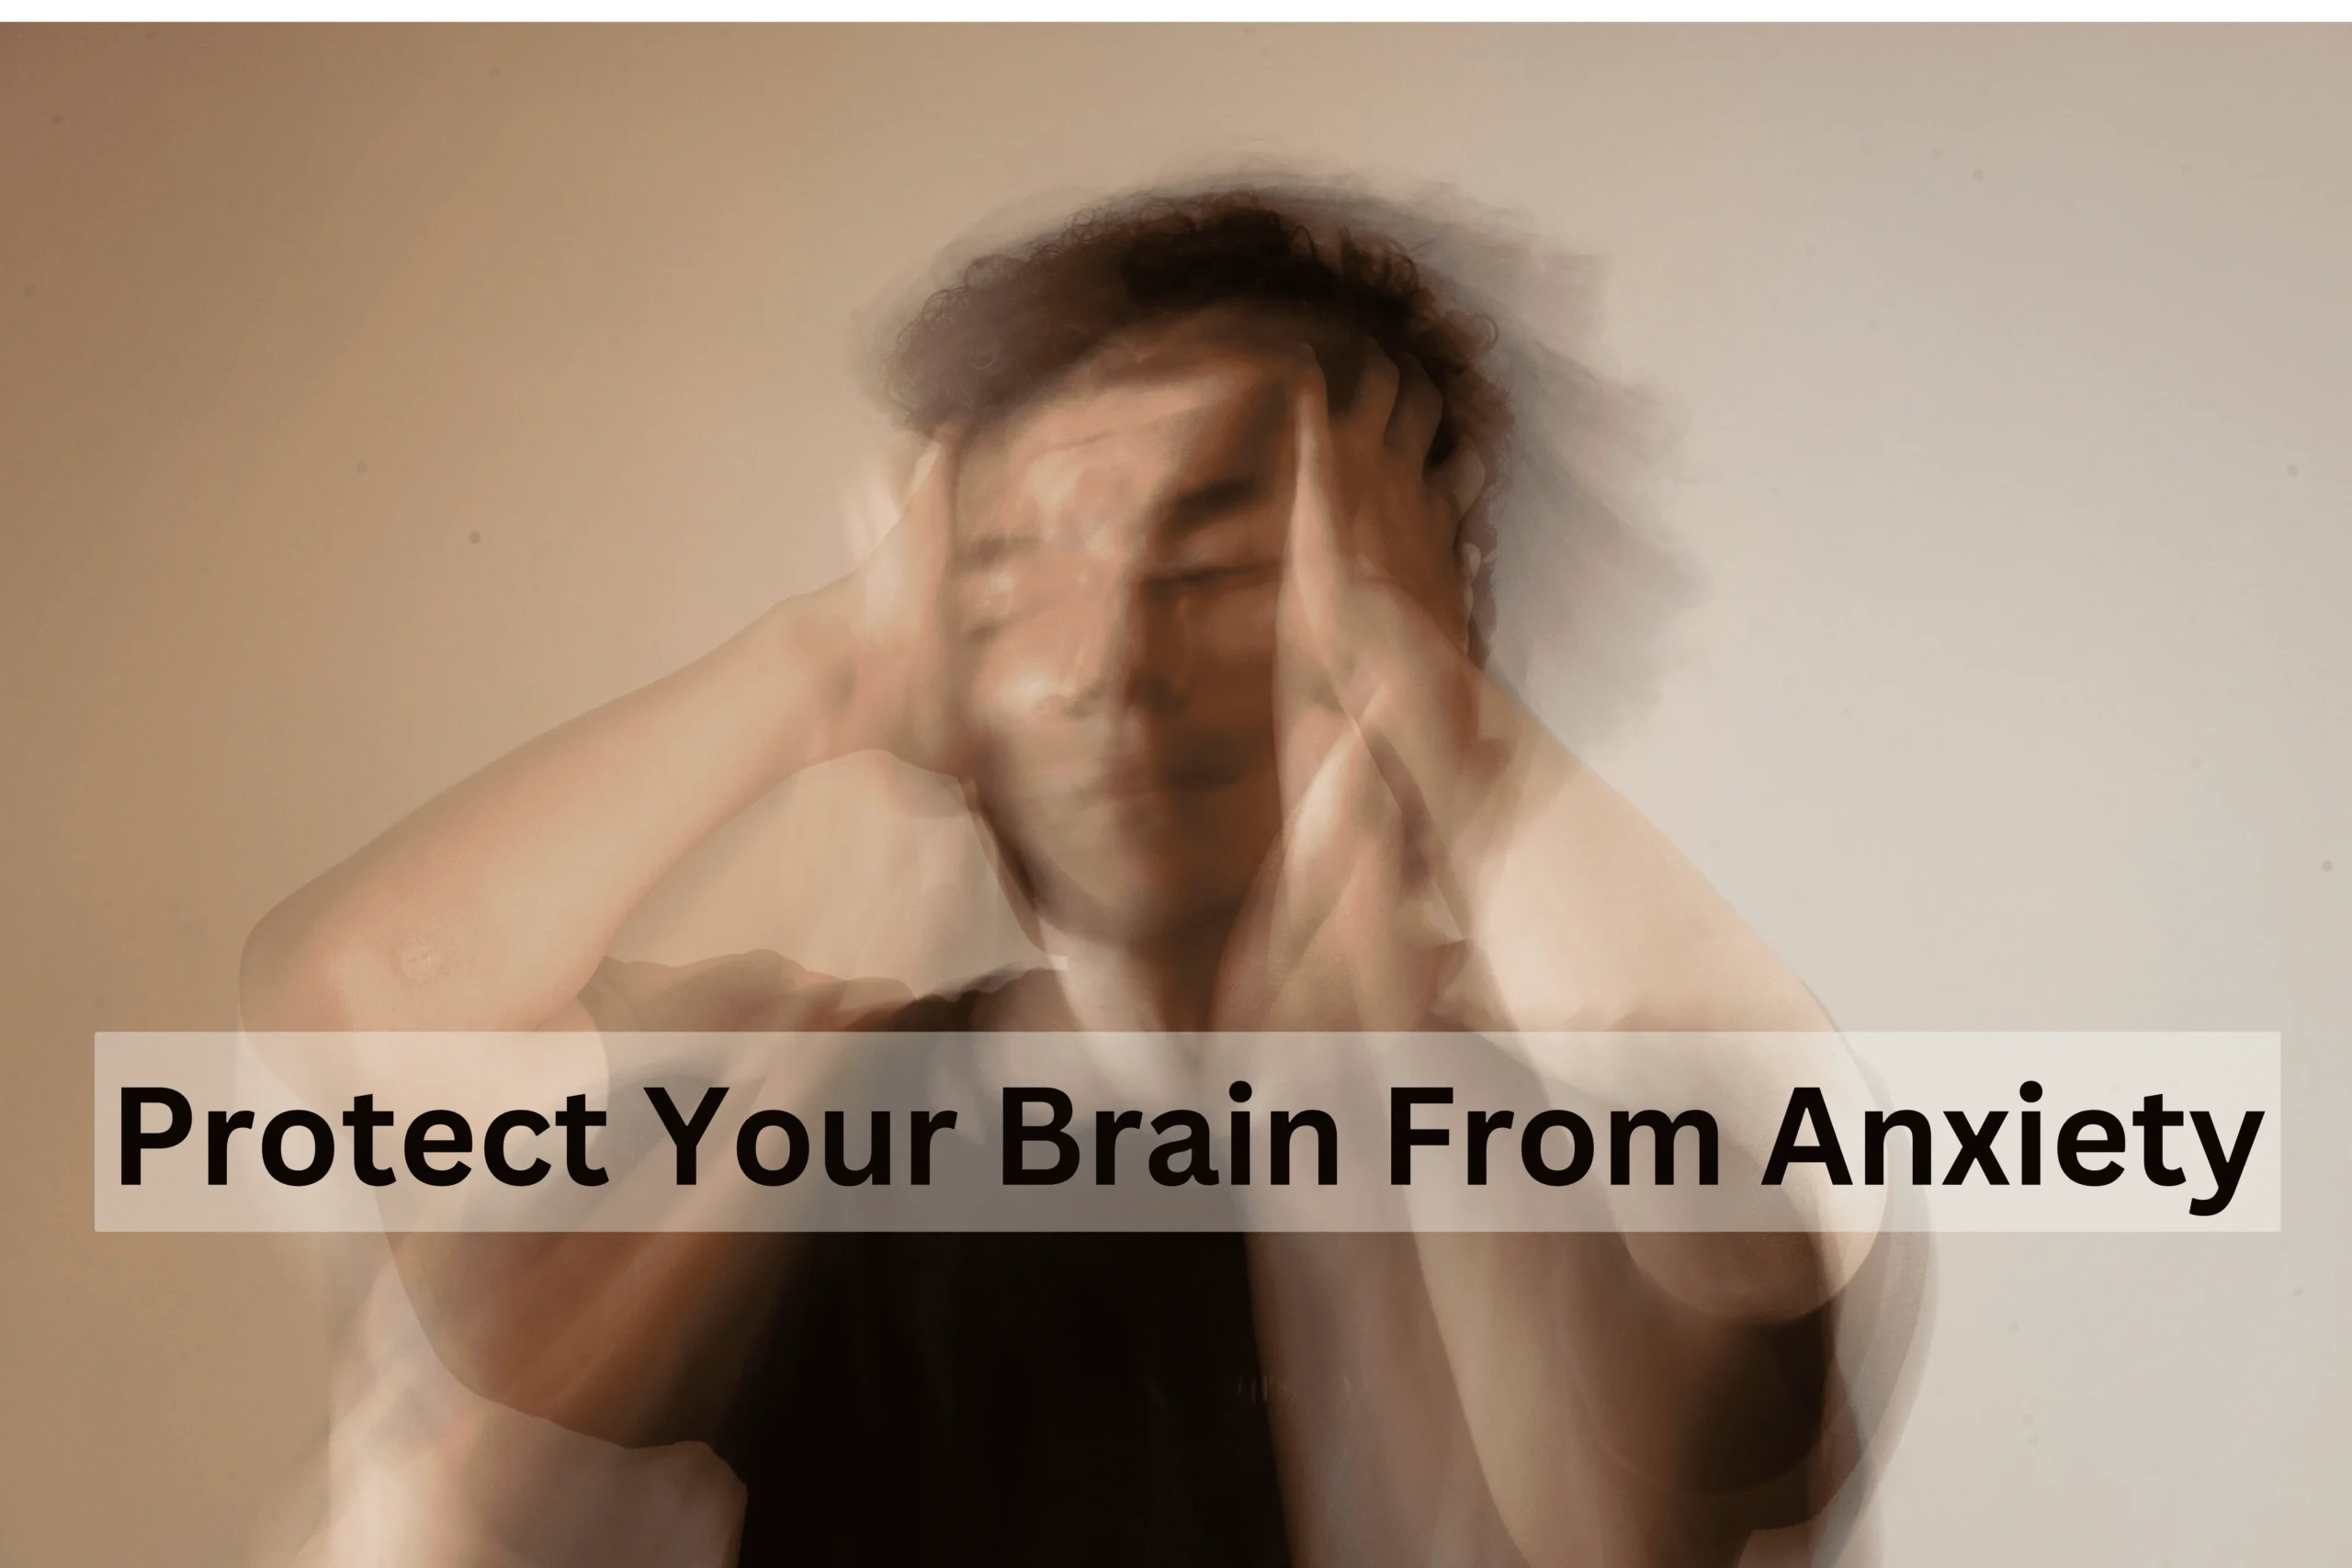 Want To Protect Your Brain From Anxiety, Buy Diazepam 10mg